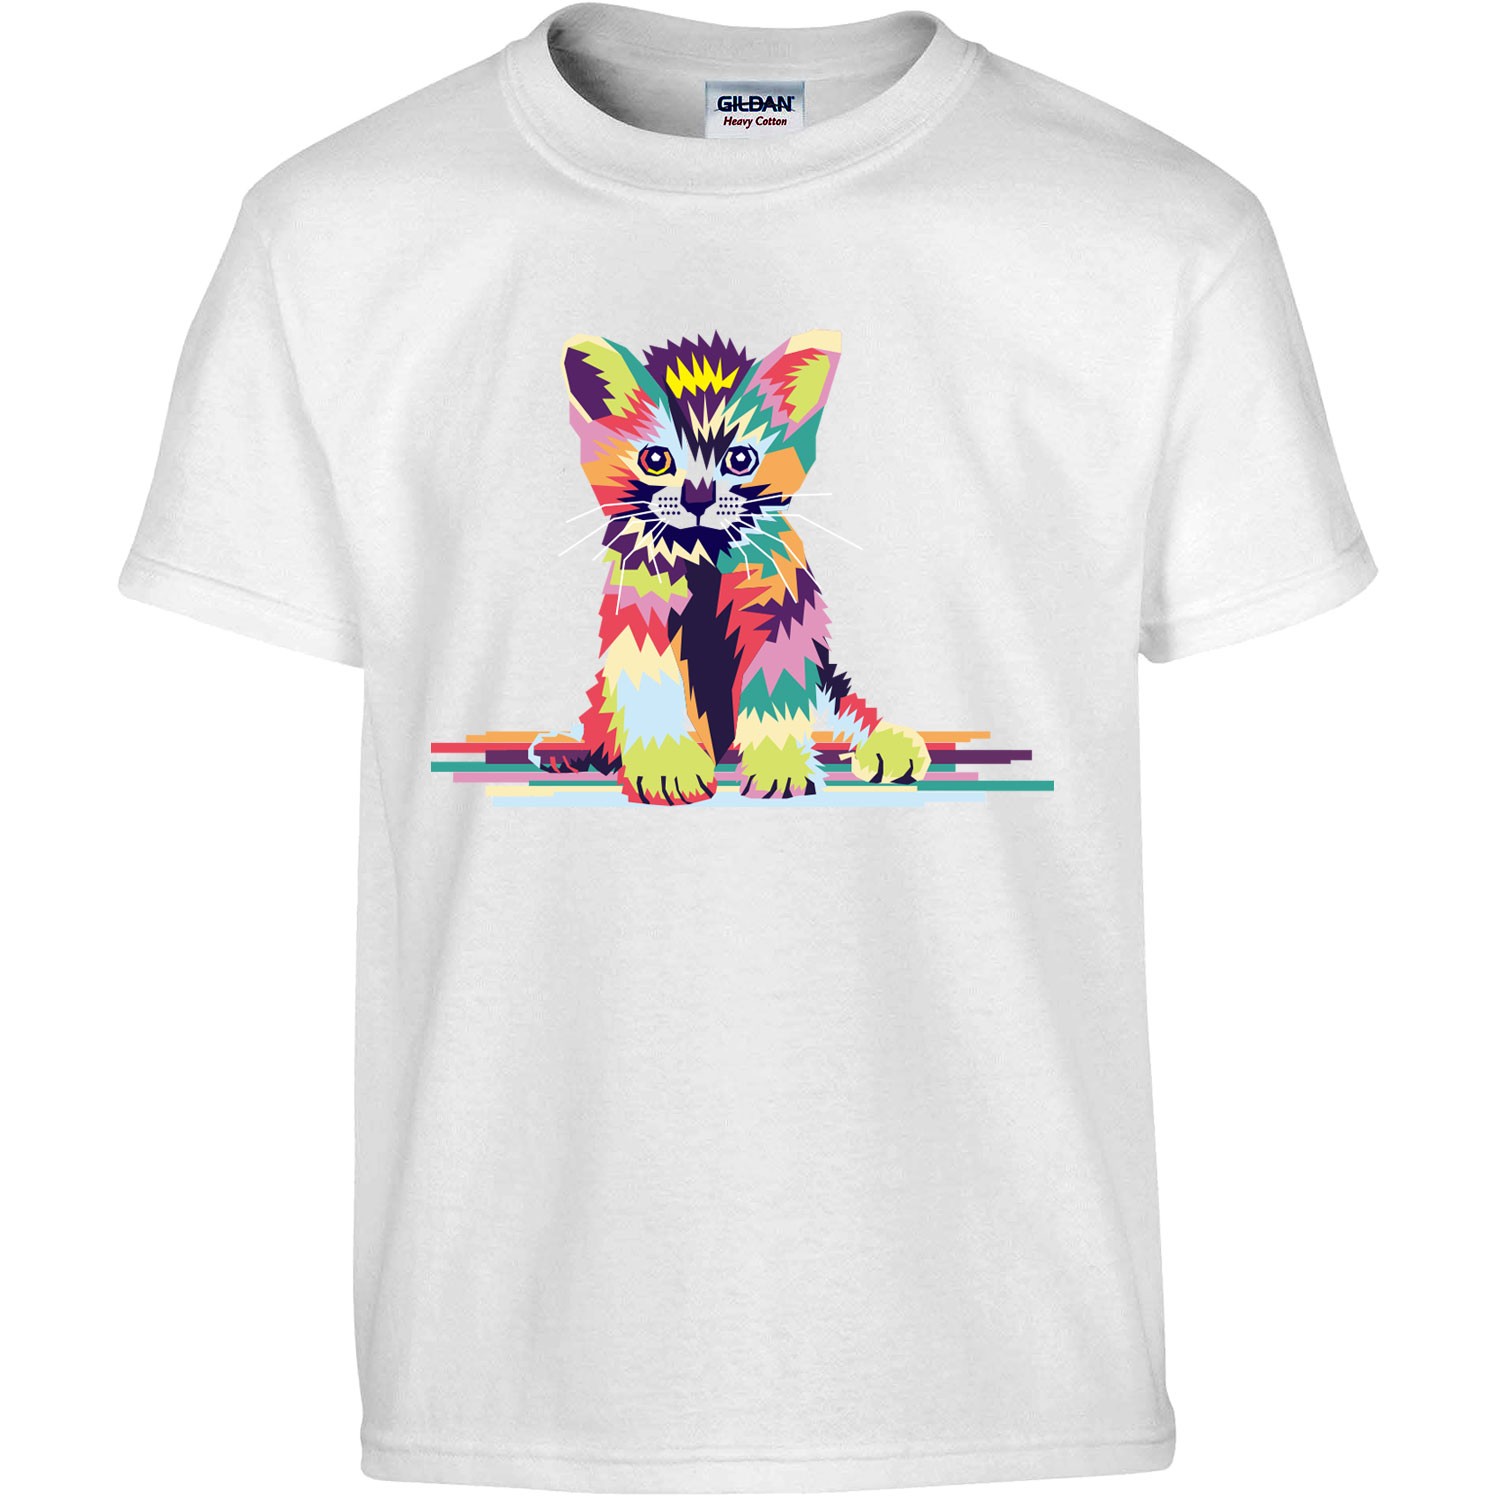 T Shirt Homme Pop Art Chaton Graphique Animaux Geometrique Chat Abstract Colorful T Shirt Manches Courtes Col Rond Kreamode